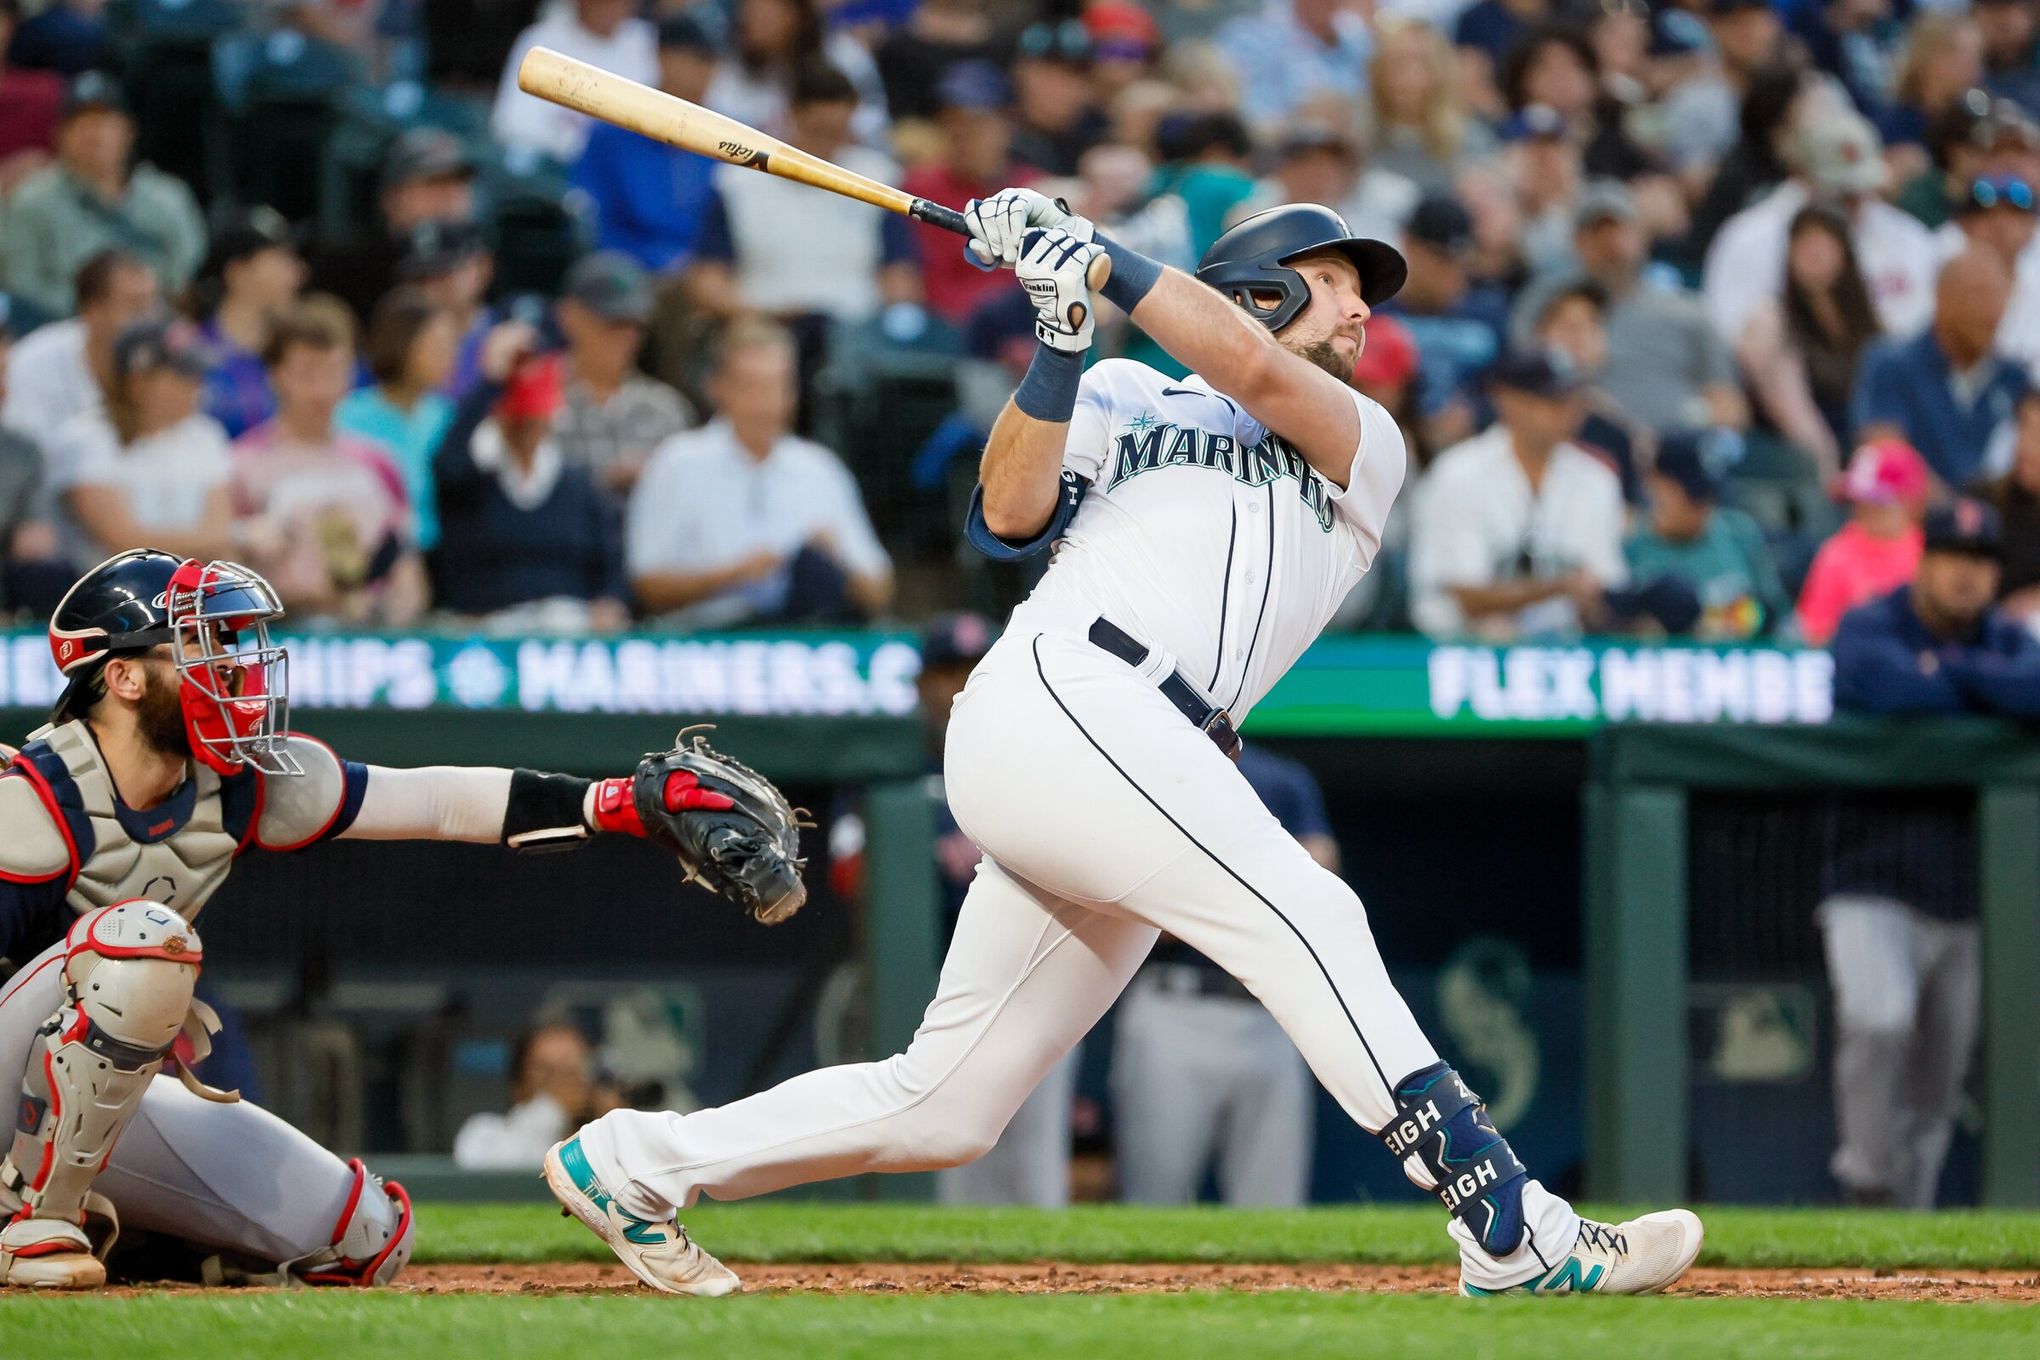 How to Watch the Mariners vs. Red Sox Game: Streaming & TV Info